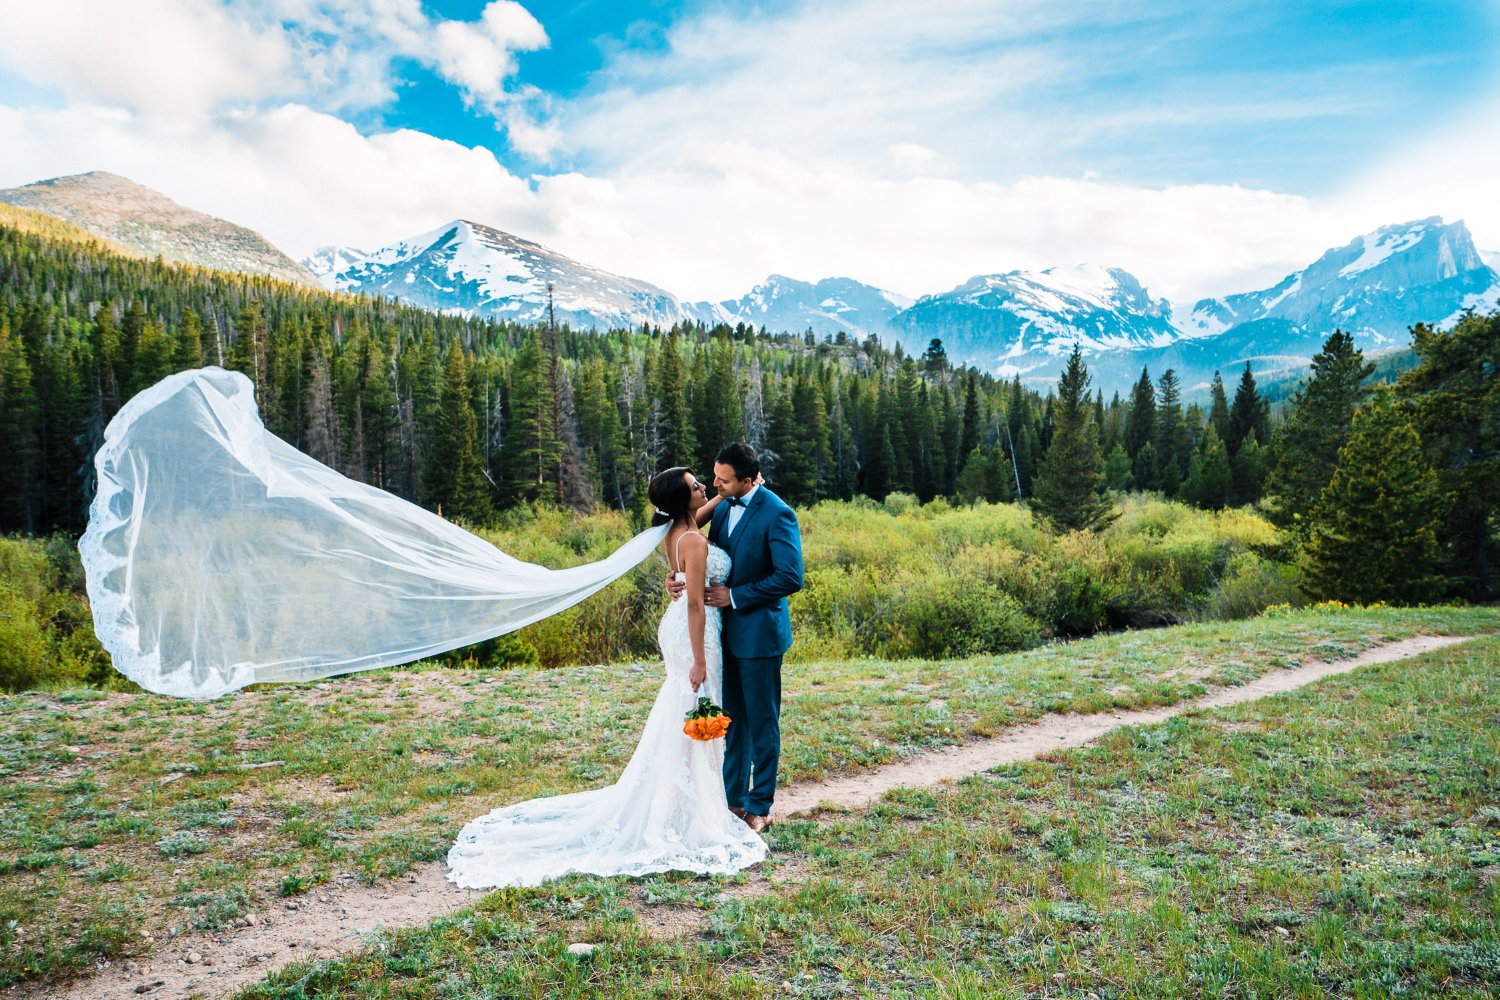 A bride and groom in their elopement photos share a romantic kiss in front of the majestic mountains, as their veil gracefully blows in the wind.